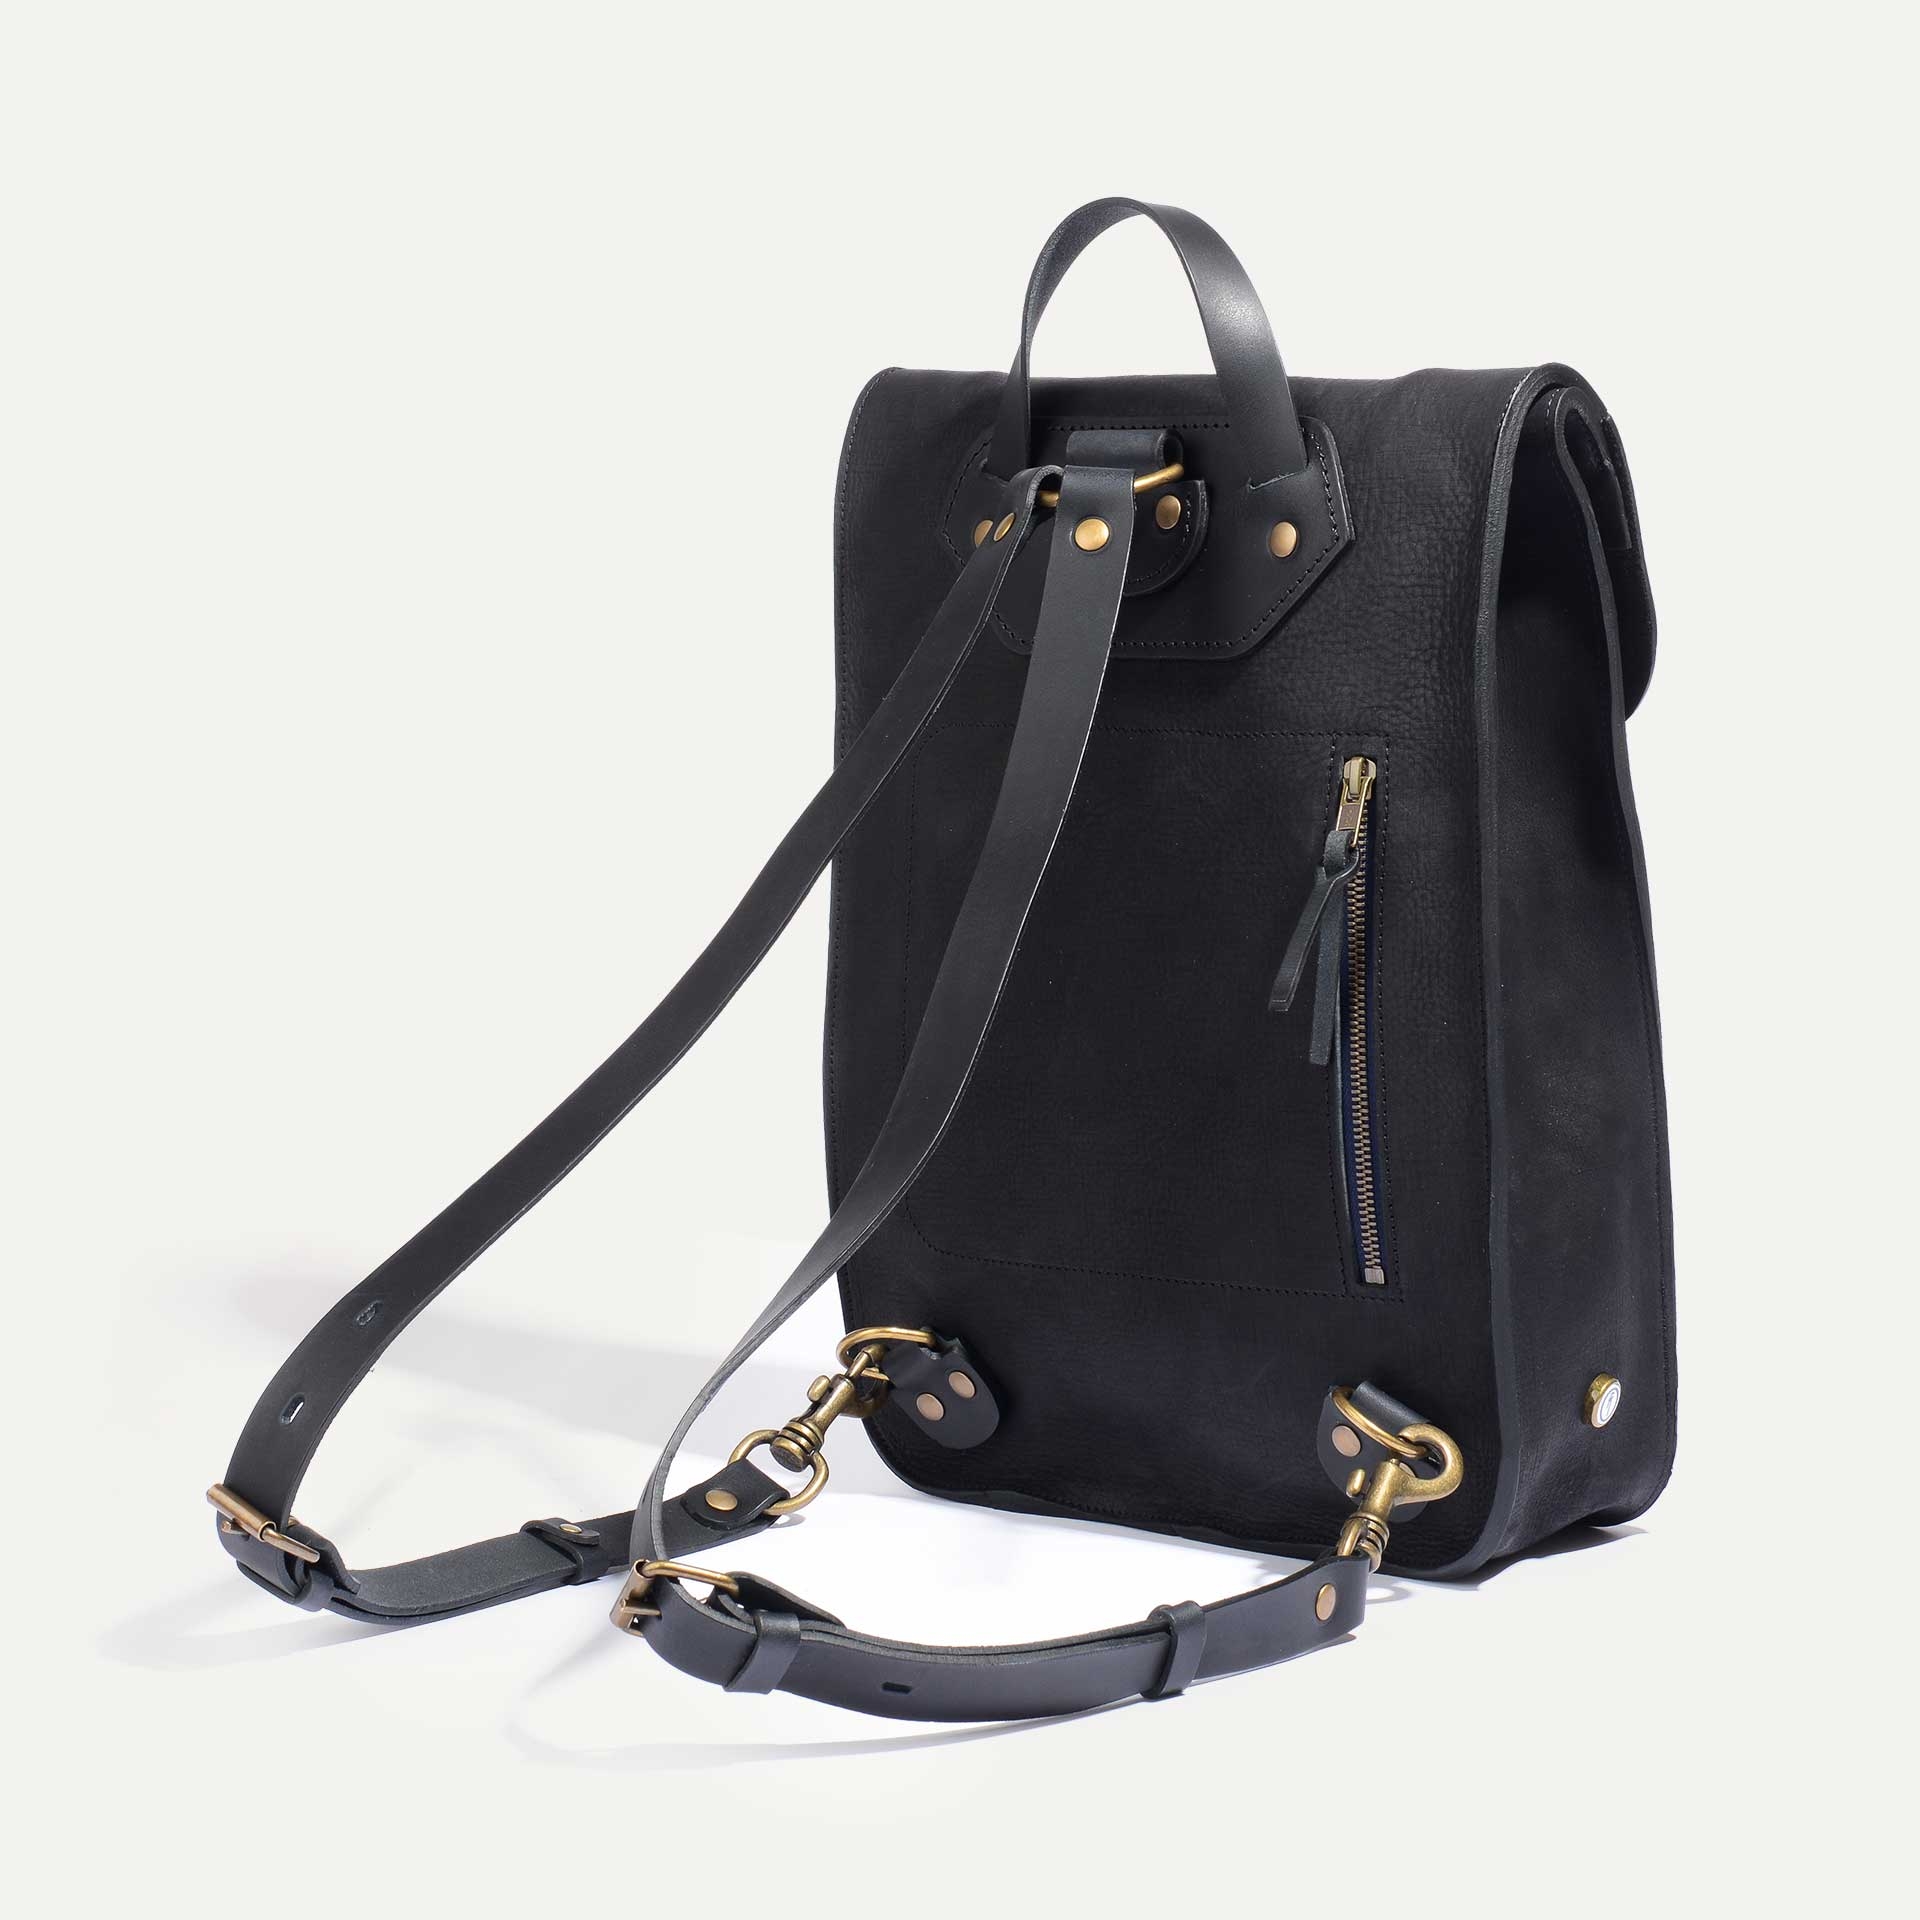 Puncho leather backpack WAX - Charcoal black / Waxed Leather (image n°2)